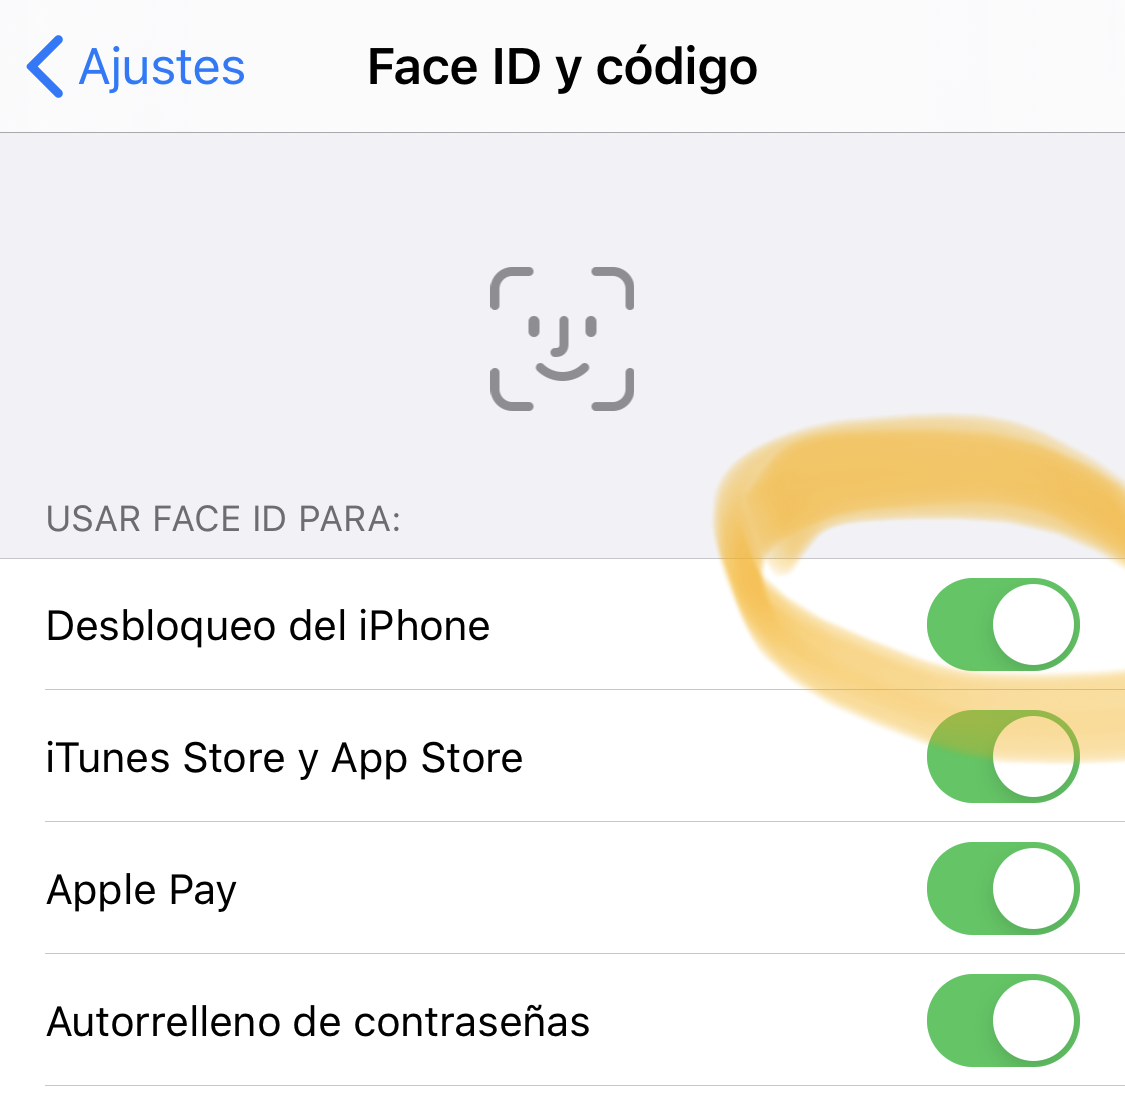 Option to disable Face ID on the lock screen